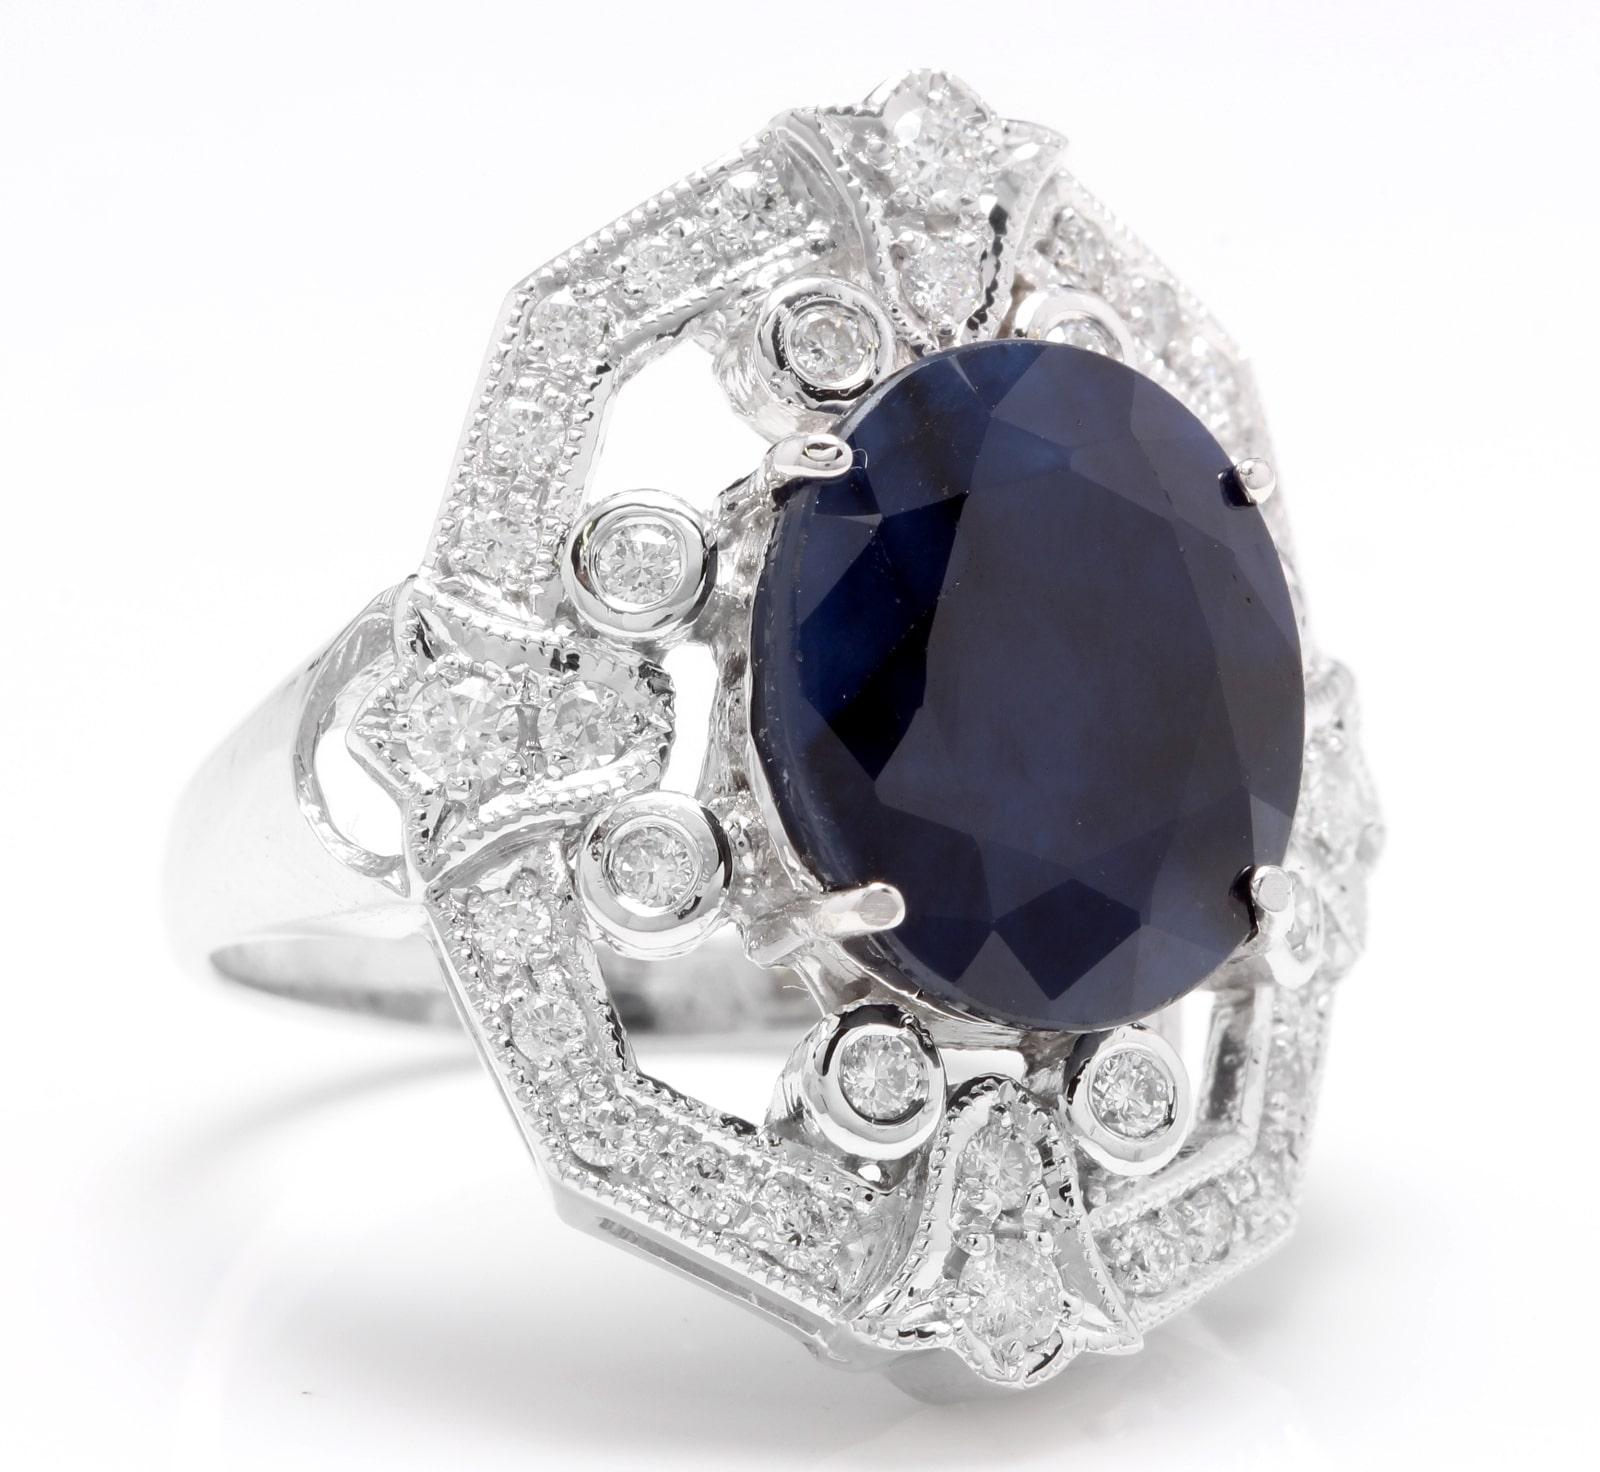 9.70 Carats Exquisite Natural Blue Sapphire and Diamond 14K Solid White Gold Ring

Total Blue Sapphire Weight is: 8.50 Carats

Sapphire Measures: Approx. 14 x 12mm

Natural Round Diamonds Weight: 1.20 Carats (color G-H / Clarity SI1-SI2)

Ring size: